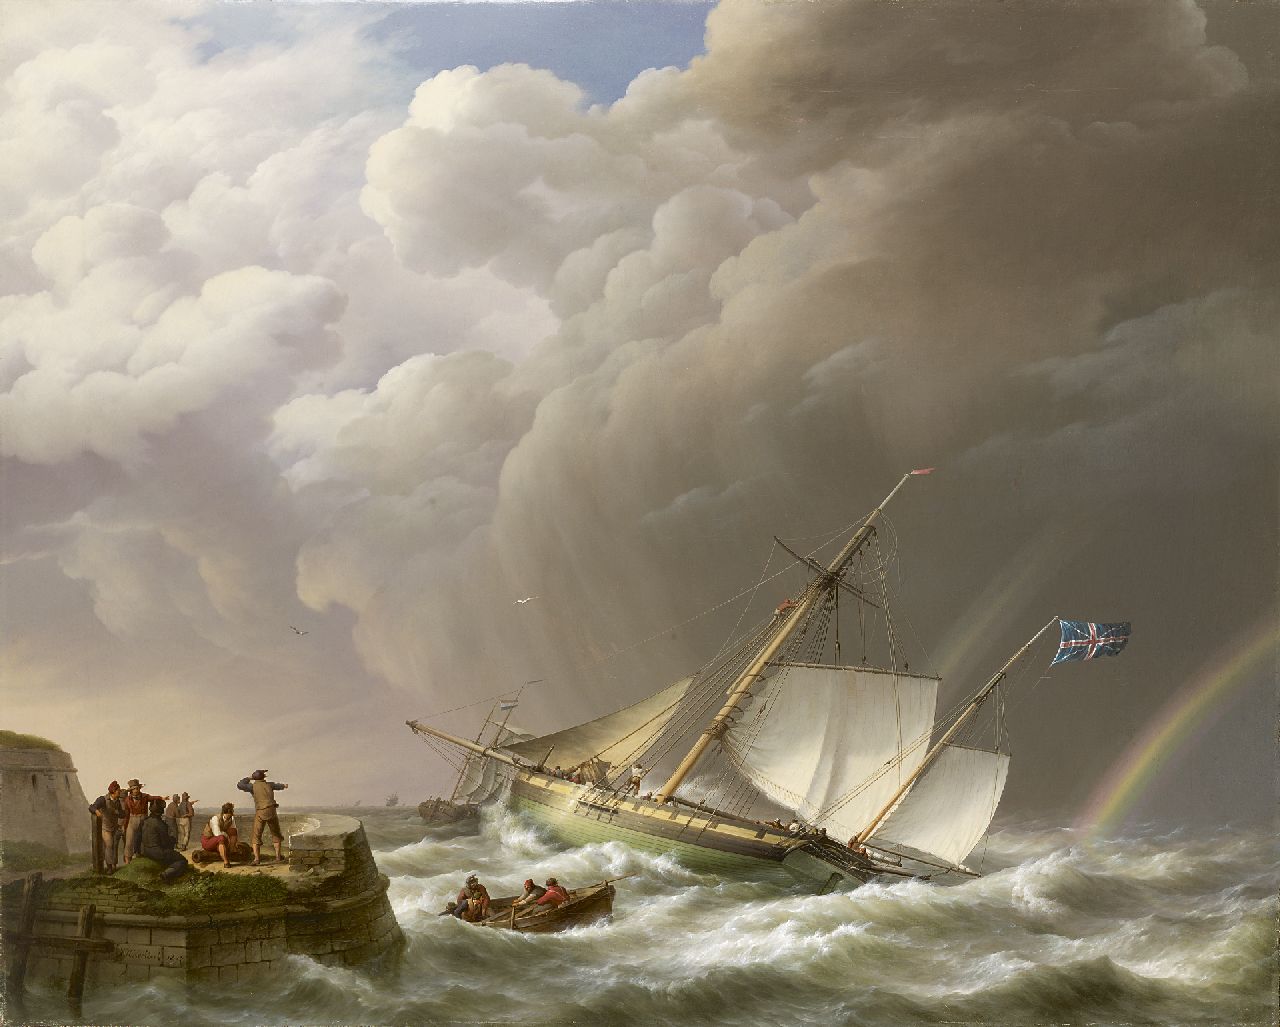 Koekkoek J.H.  | Johannes Hermanus Koekkoek, Sailing ship off a jetty in stormy weather, oil on canvas 113.0 x 142.0 cm, signed l.l. and dated 1827